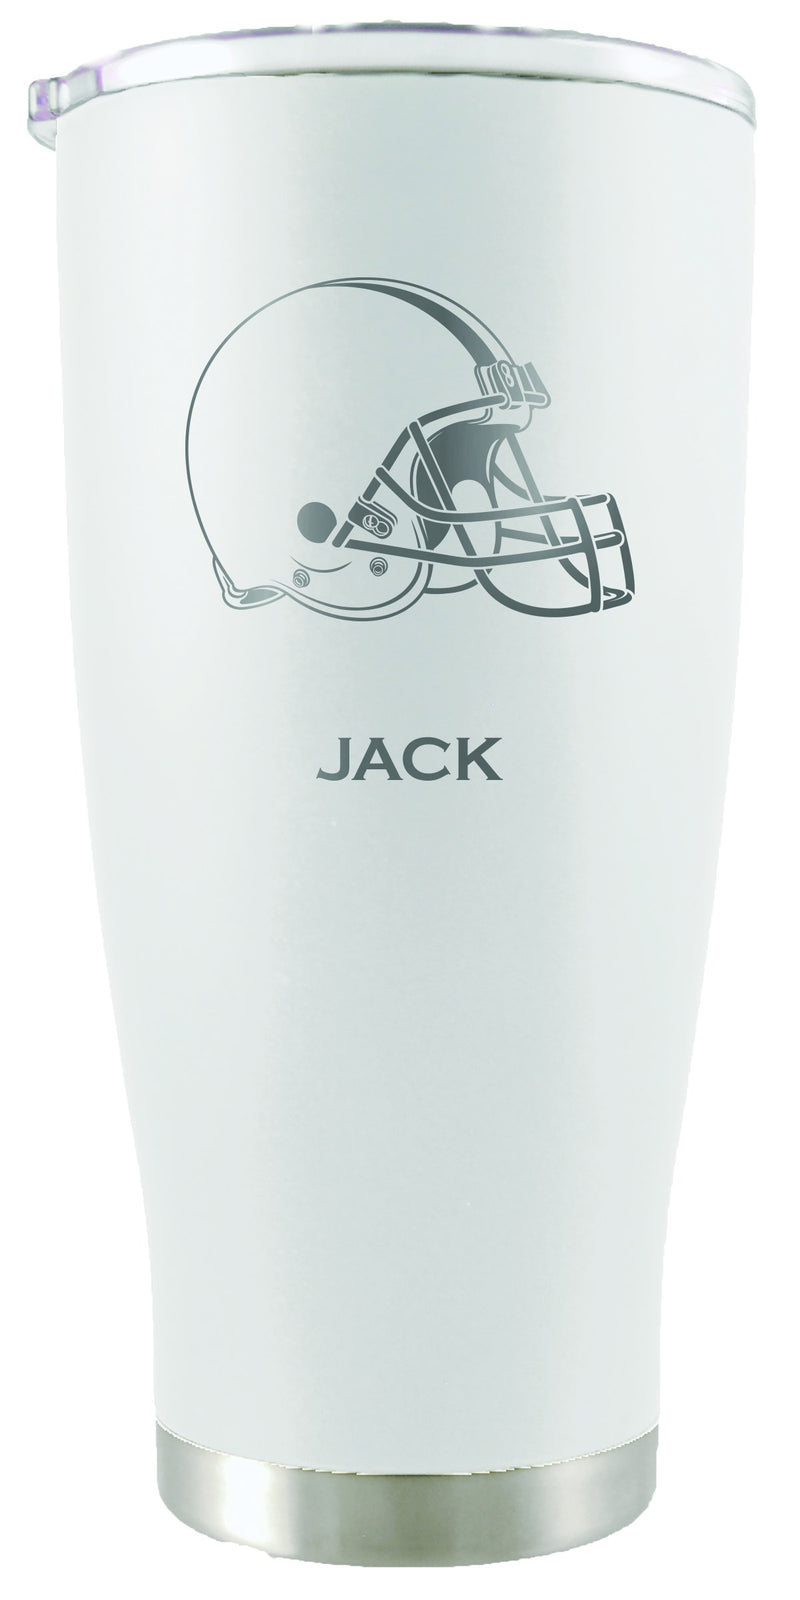 20oz White Personalized Stainless Steel Tumbler | Cleveland Browns
Cleveland Browns, CLV, CurrentProduct, Drinkware_category_All, NFL, Personalized_Personalized, Stainless Steel
The Memory Company